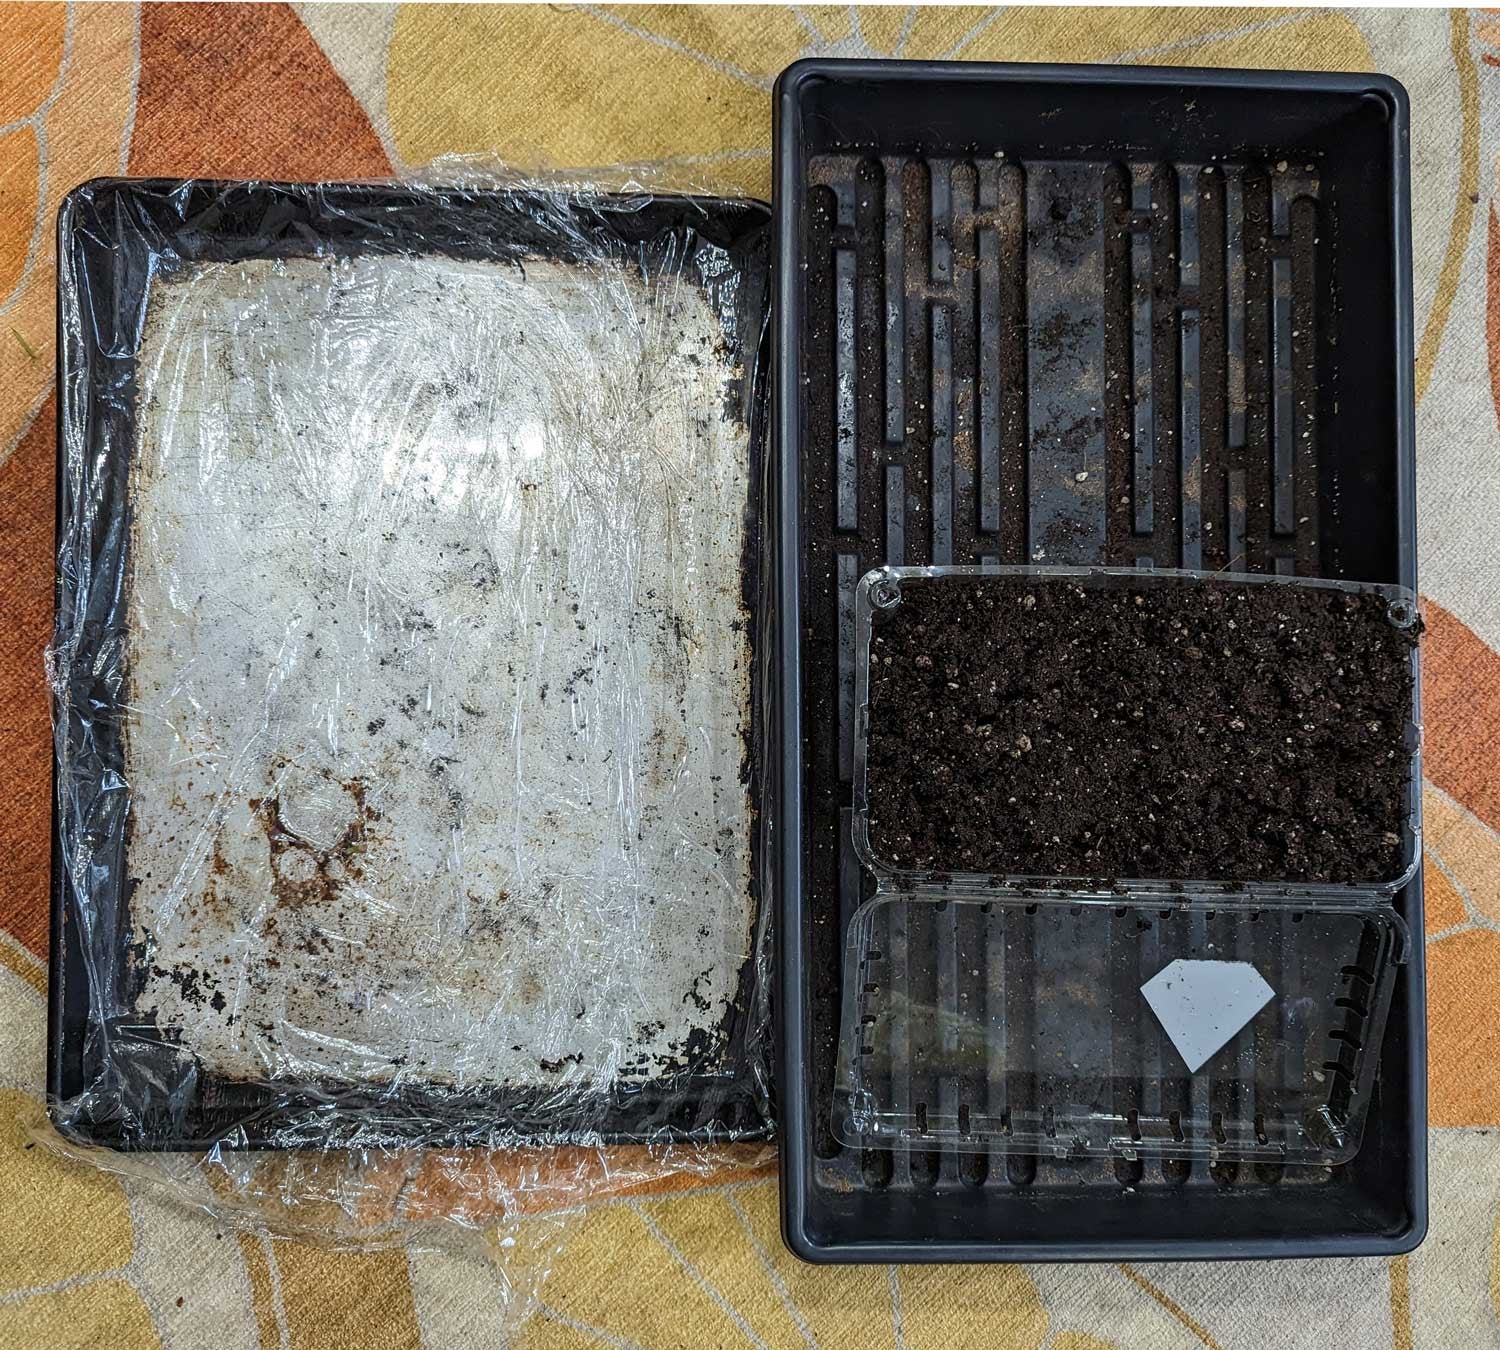 On the right is a 1020 tray, without holes. On the left is one of my older gross cookie sheets, covered in plastic wrap. Both are fine. (Photo: Amanda Blum)